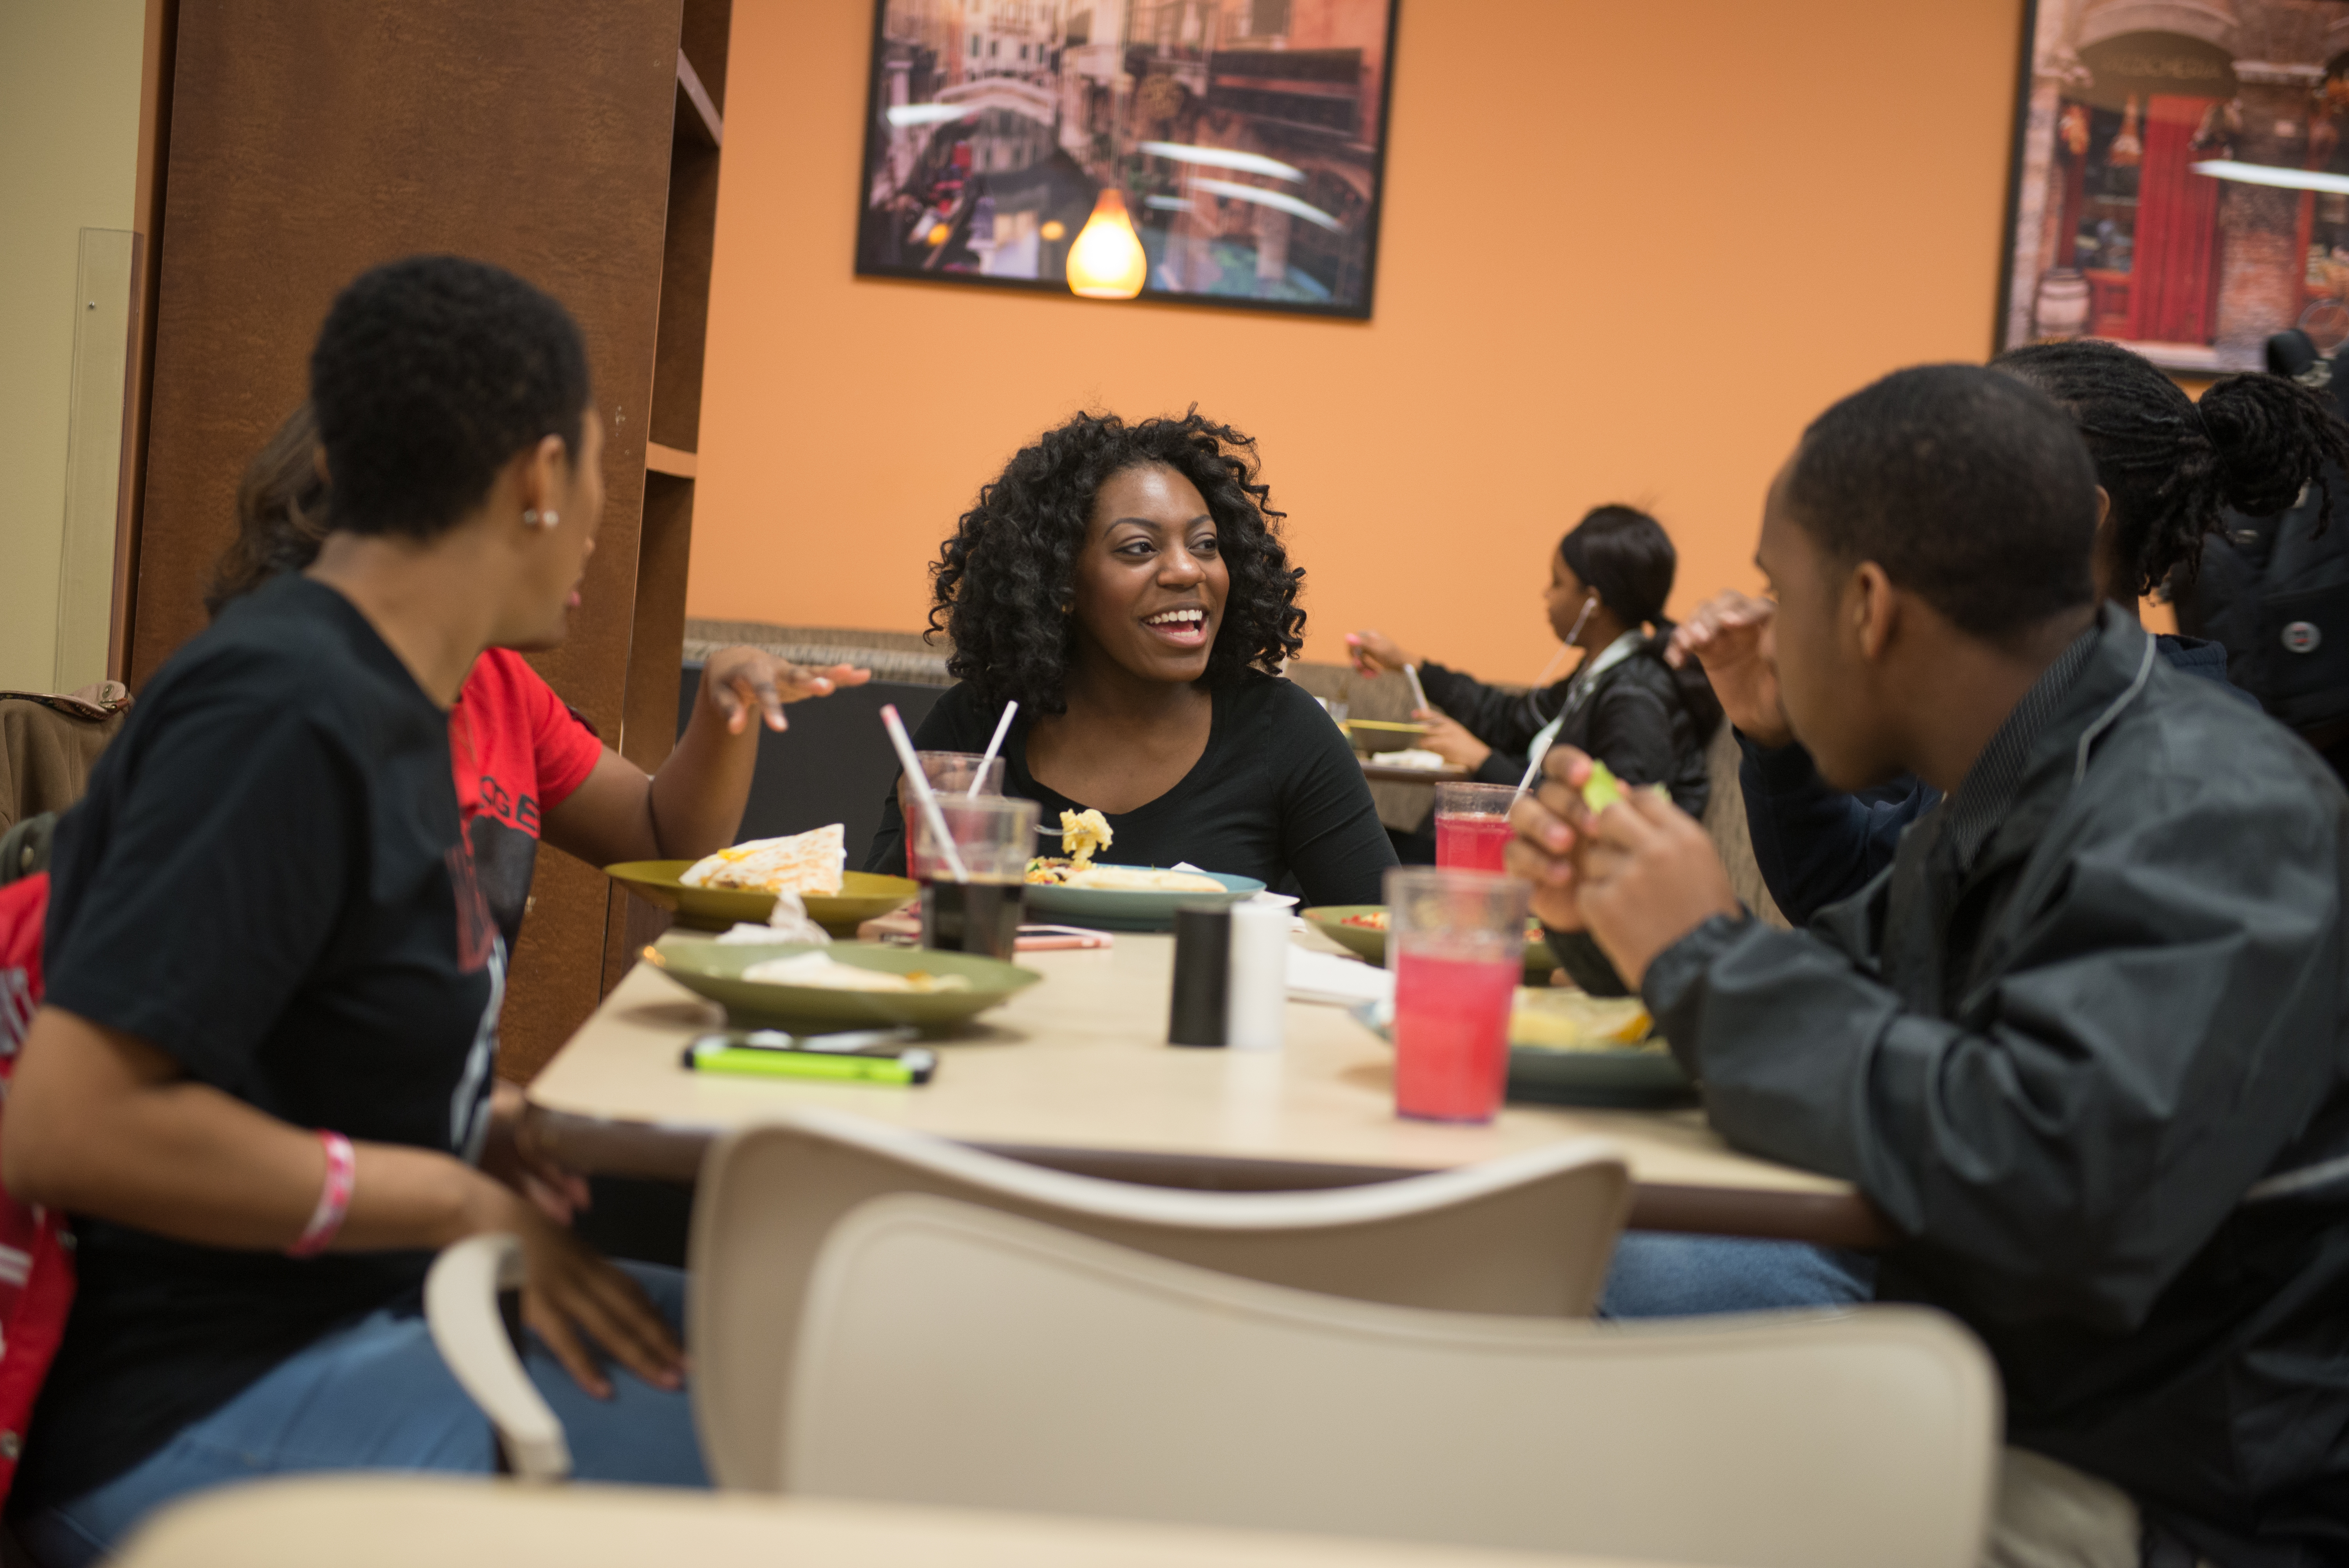 Students at at dining center table